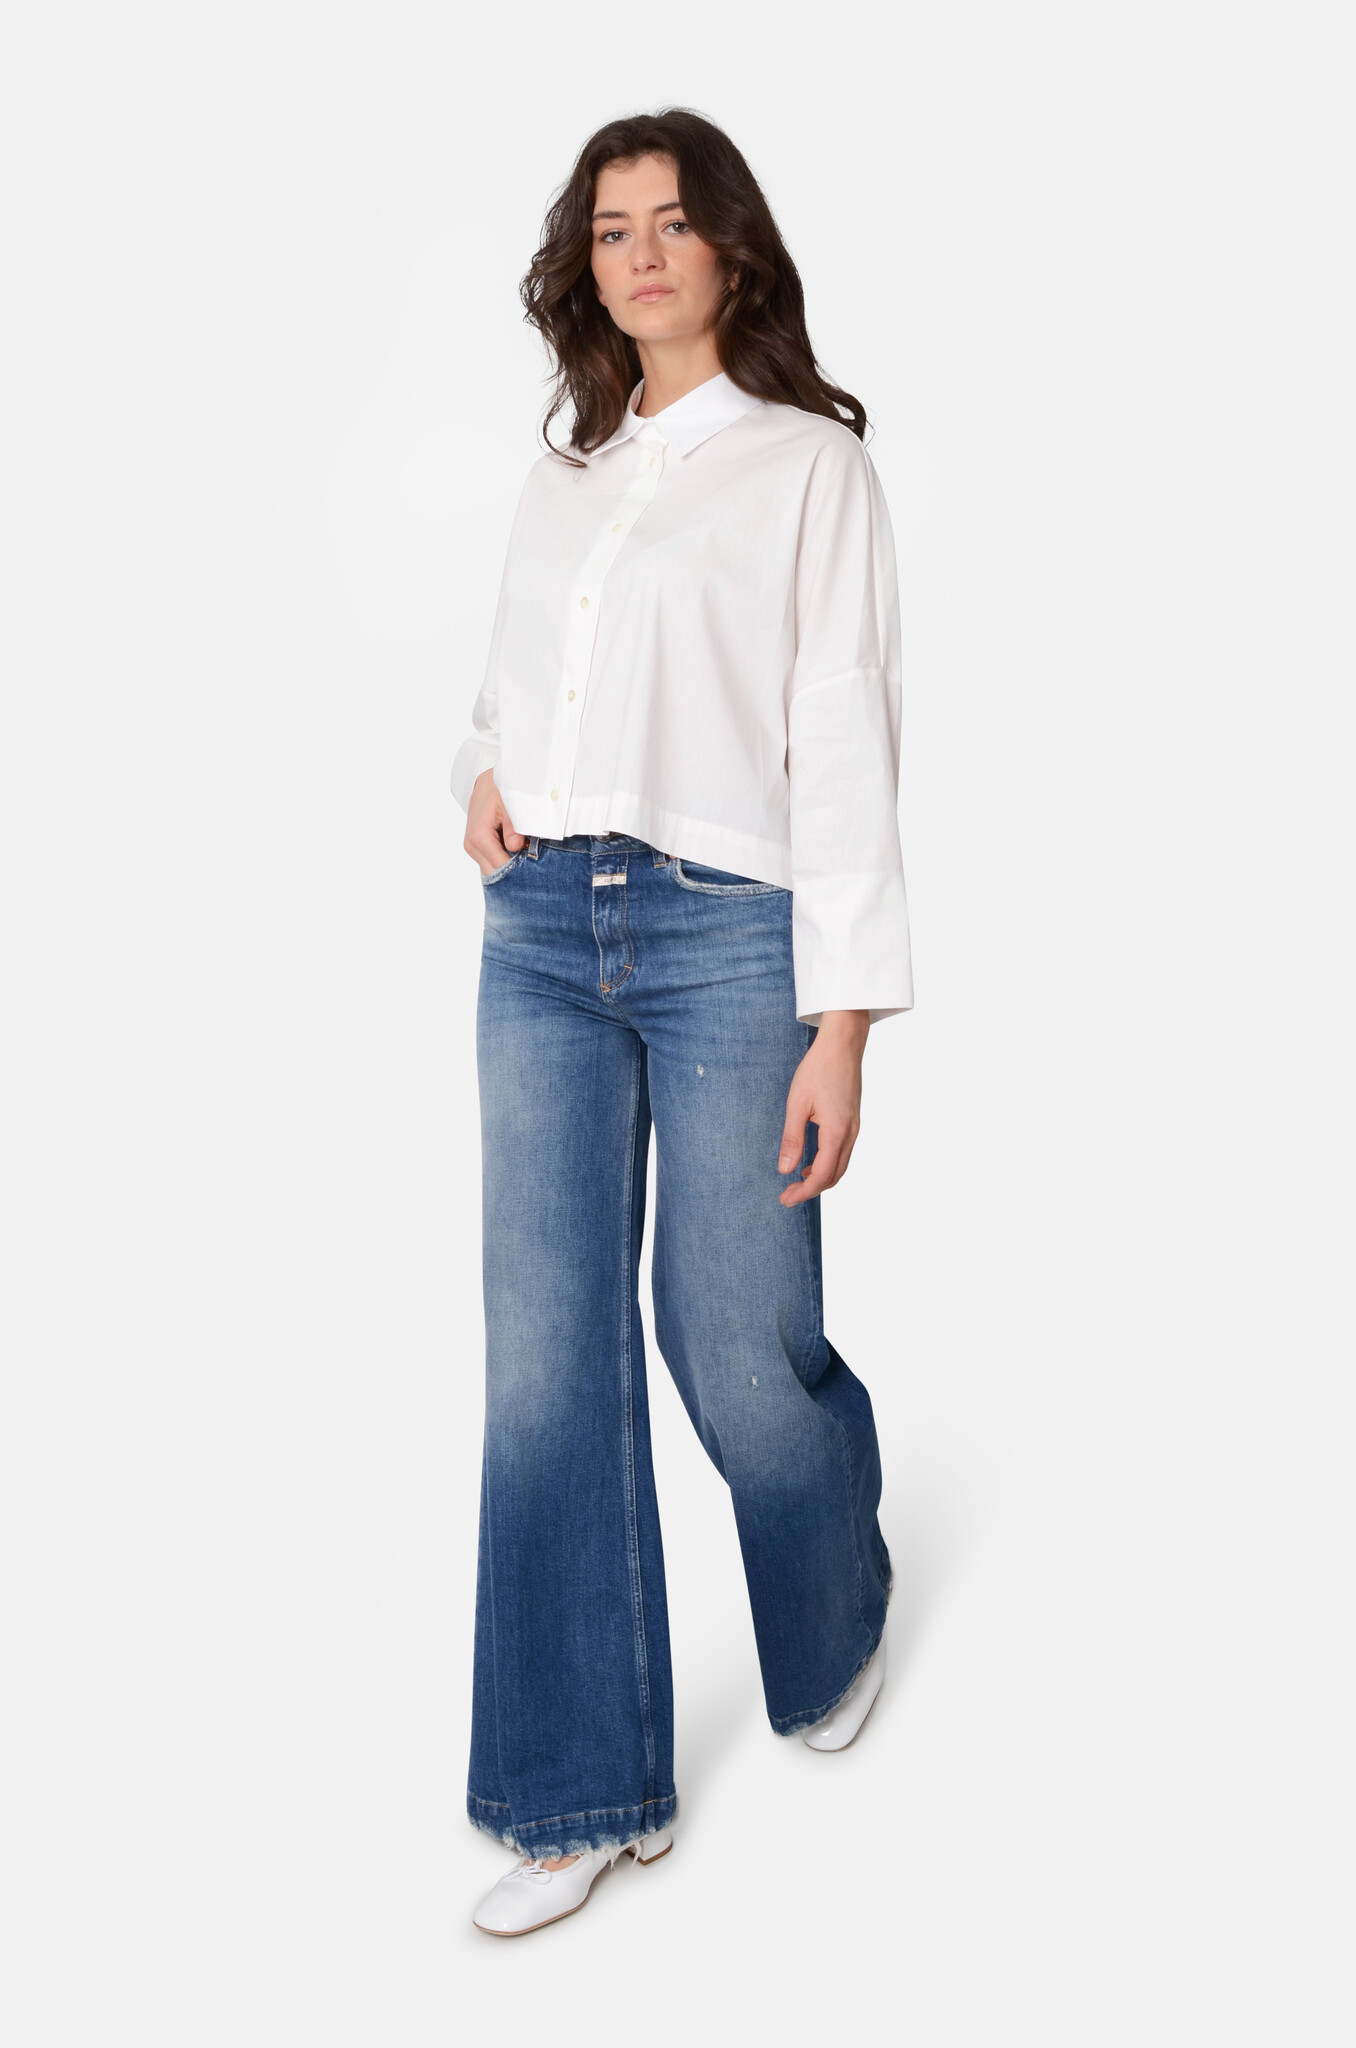 Cuff Sleeve Cropped Shirt in Off-White-2